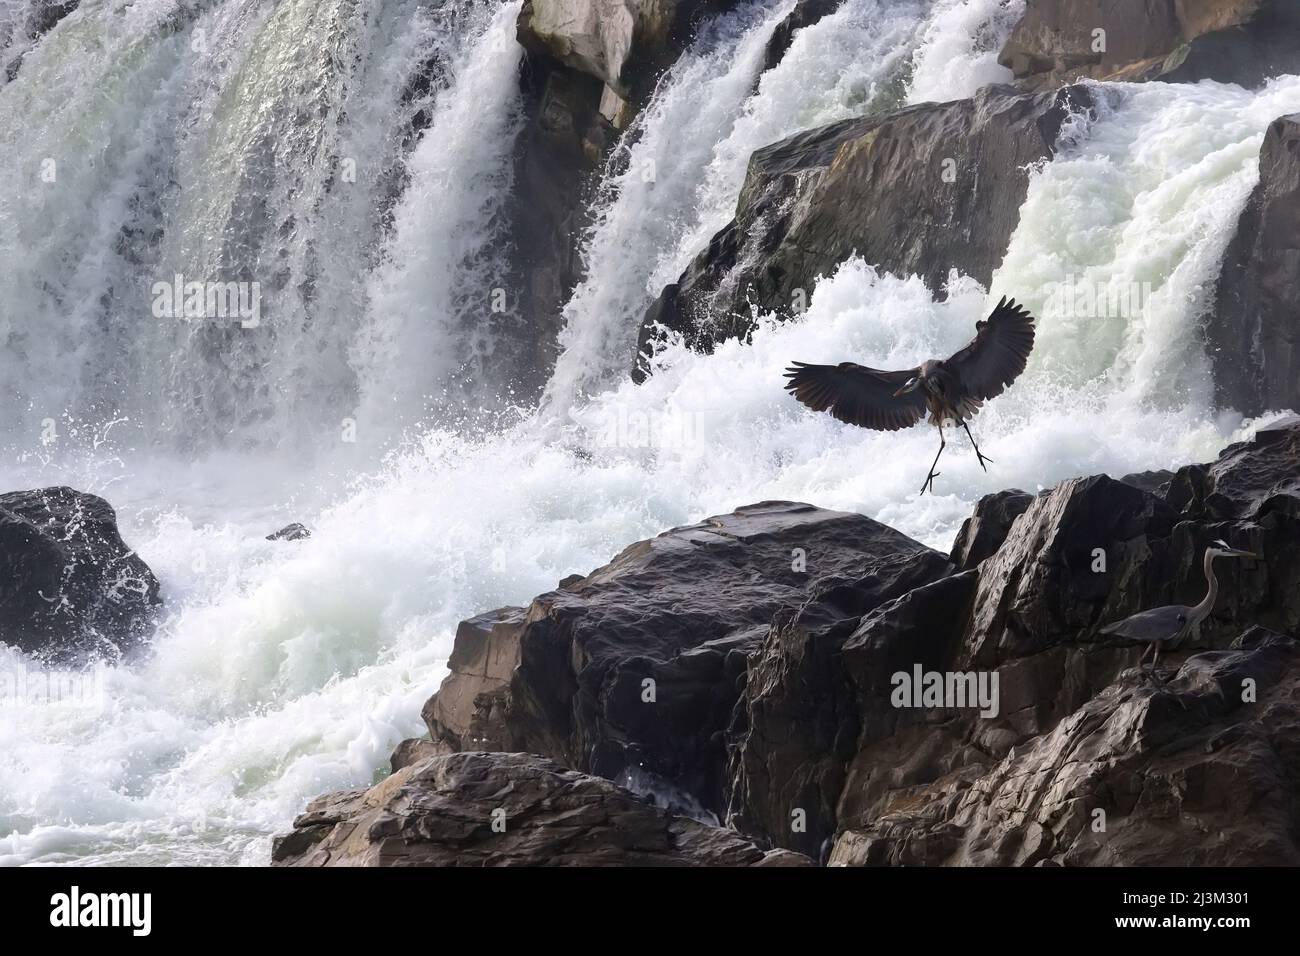 A great blue heron lands on the rocks below Great Falls.; Great Falls, Potomac River, Maryland. Stock Photo